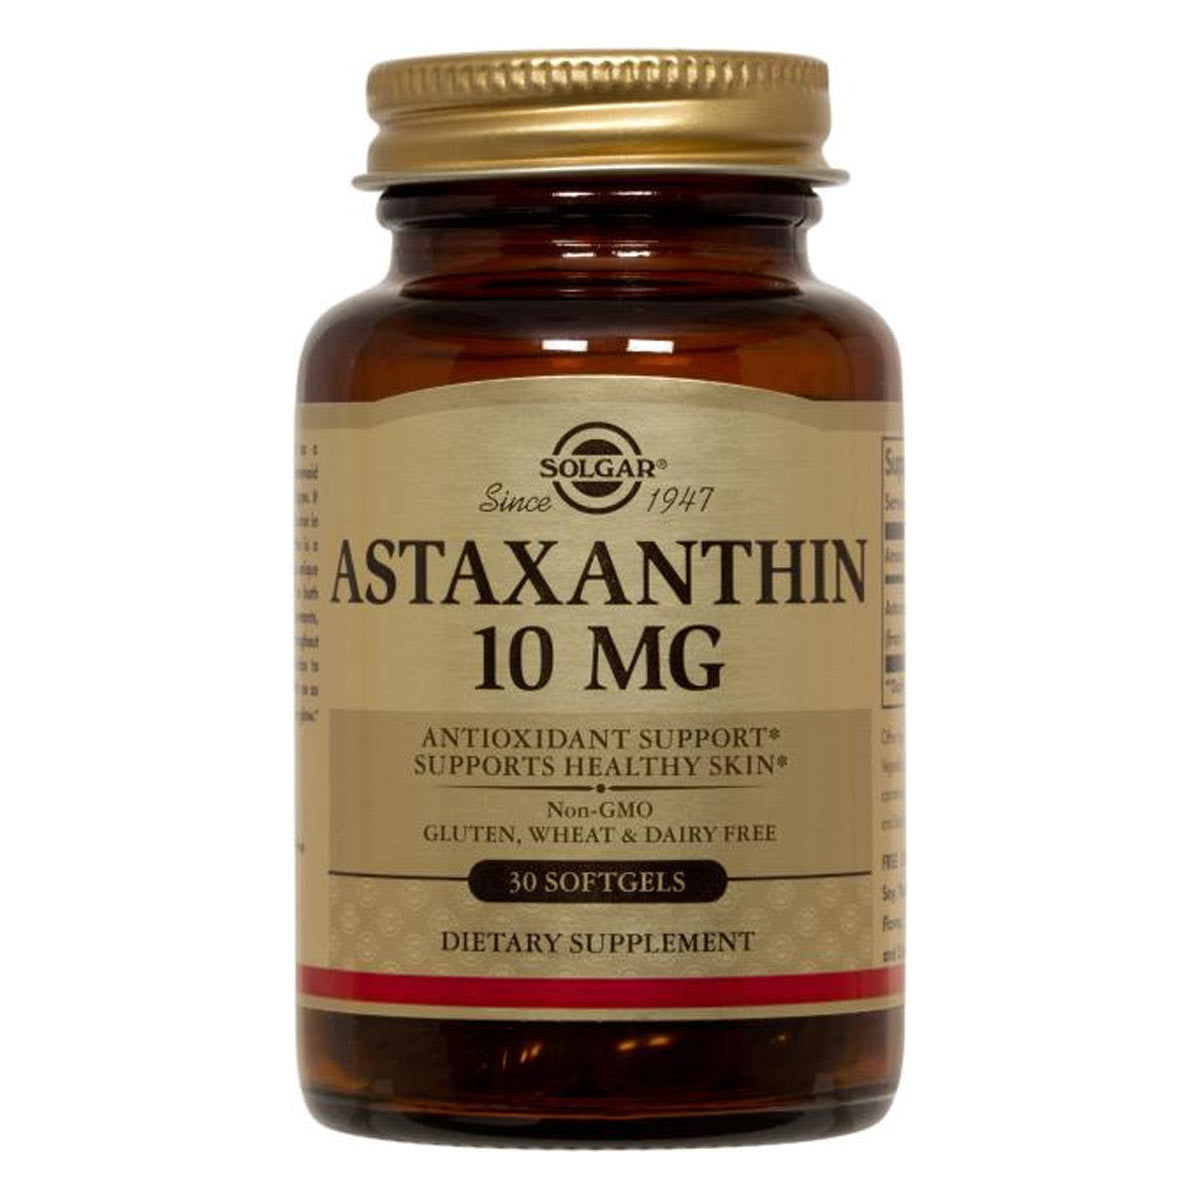 Primary image of Astaxanthin 10mg